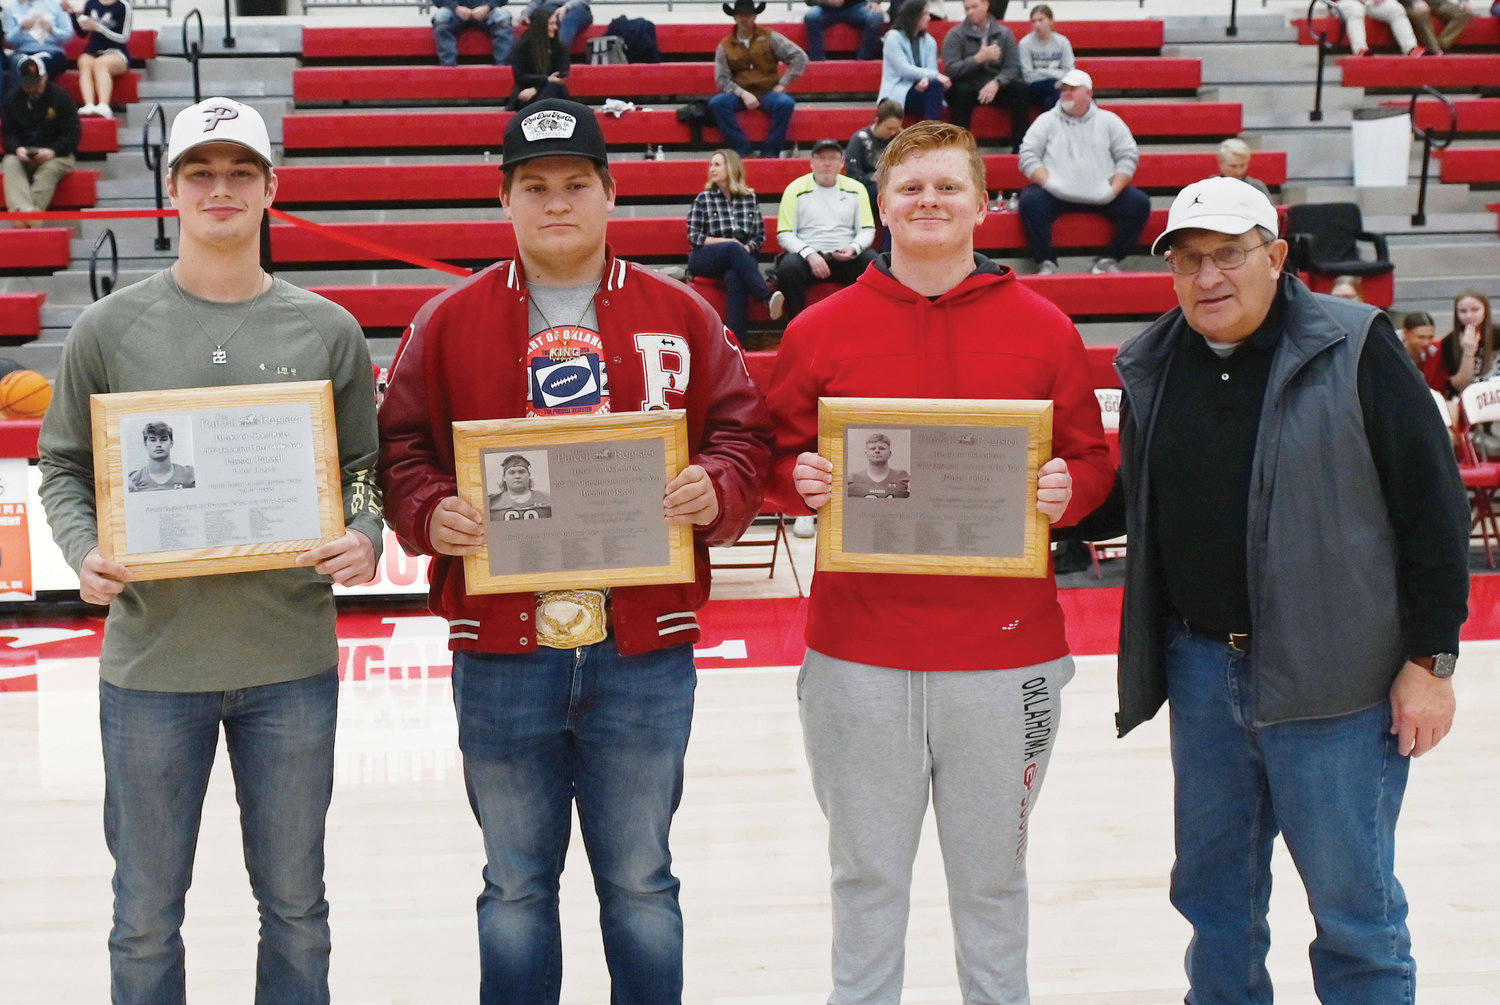 Three Purcell football players were honored as Heart of Oklahoma Player of the year at their respective positions. From left were Payson Purcell – Defensive Player of the Year, Brendon Bacon – Co-Offensive Lineman of the Year and Brody Holder – Defensive Lineman of the Year. Purcell Register publisher John D. Montgomery, far right, presented the awards. Purcell finished the 2022 season with 107 tackles. Bacon graded out at 86 percent blocking for the season. Holder registered 80 tackles in 2022 and had one quarterback sack.